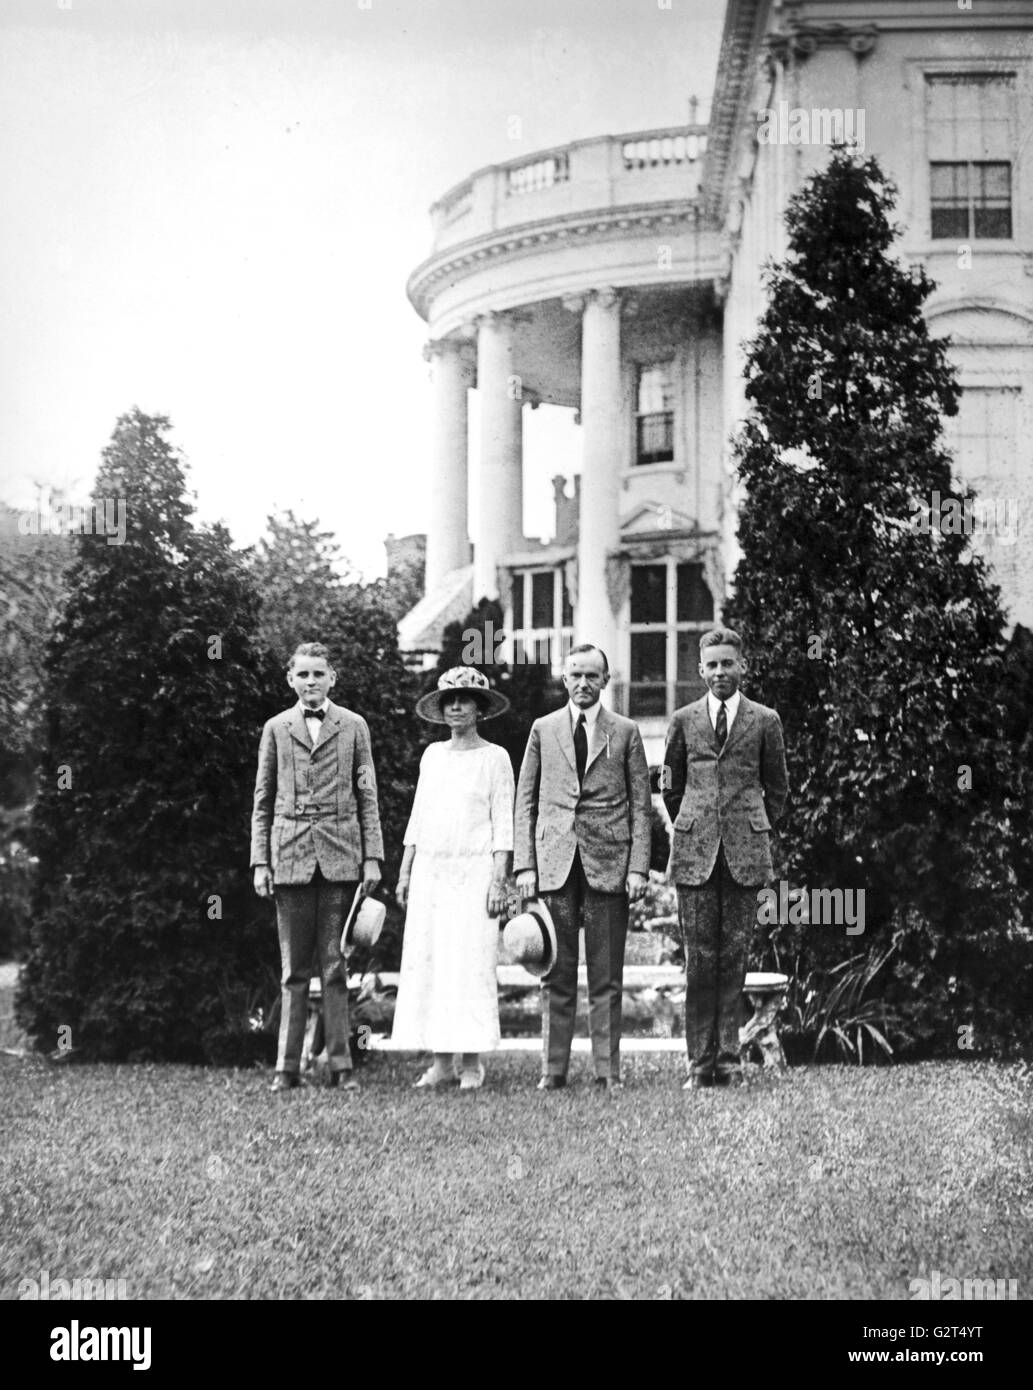 President Calvin Coolidge, his wife Grace and their two sons posing on the White House lawn. Stock Photo